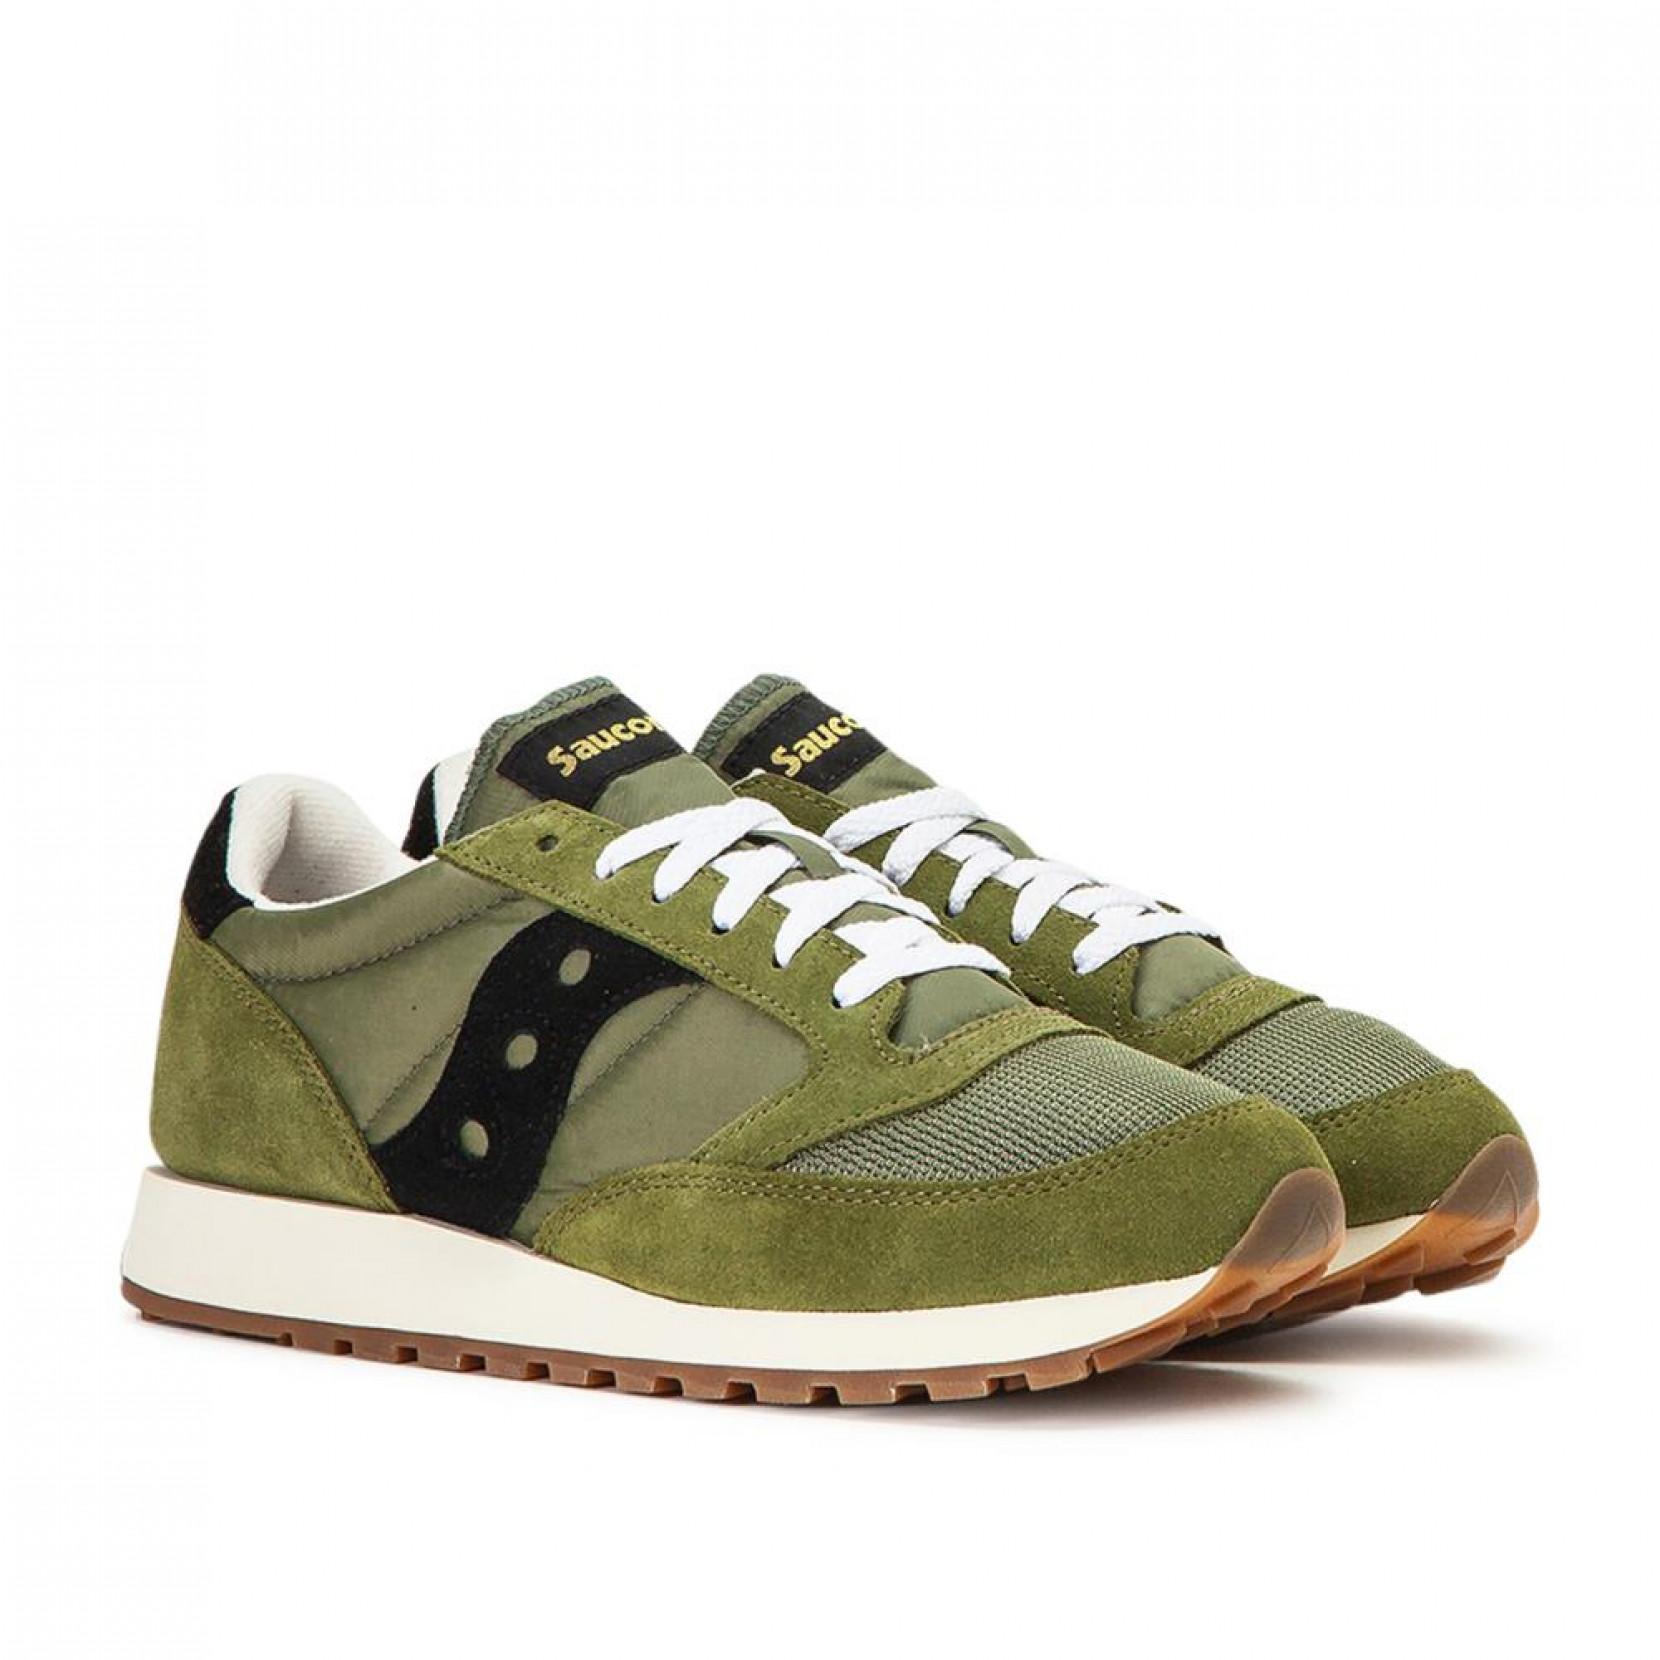 Saucony Synthetic Jazz Original in Olive (Green) for Men - Lyst